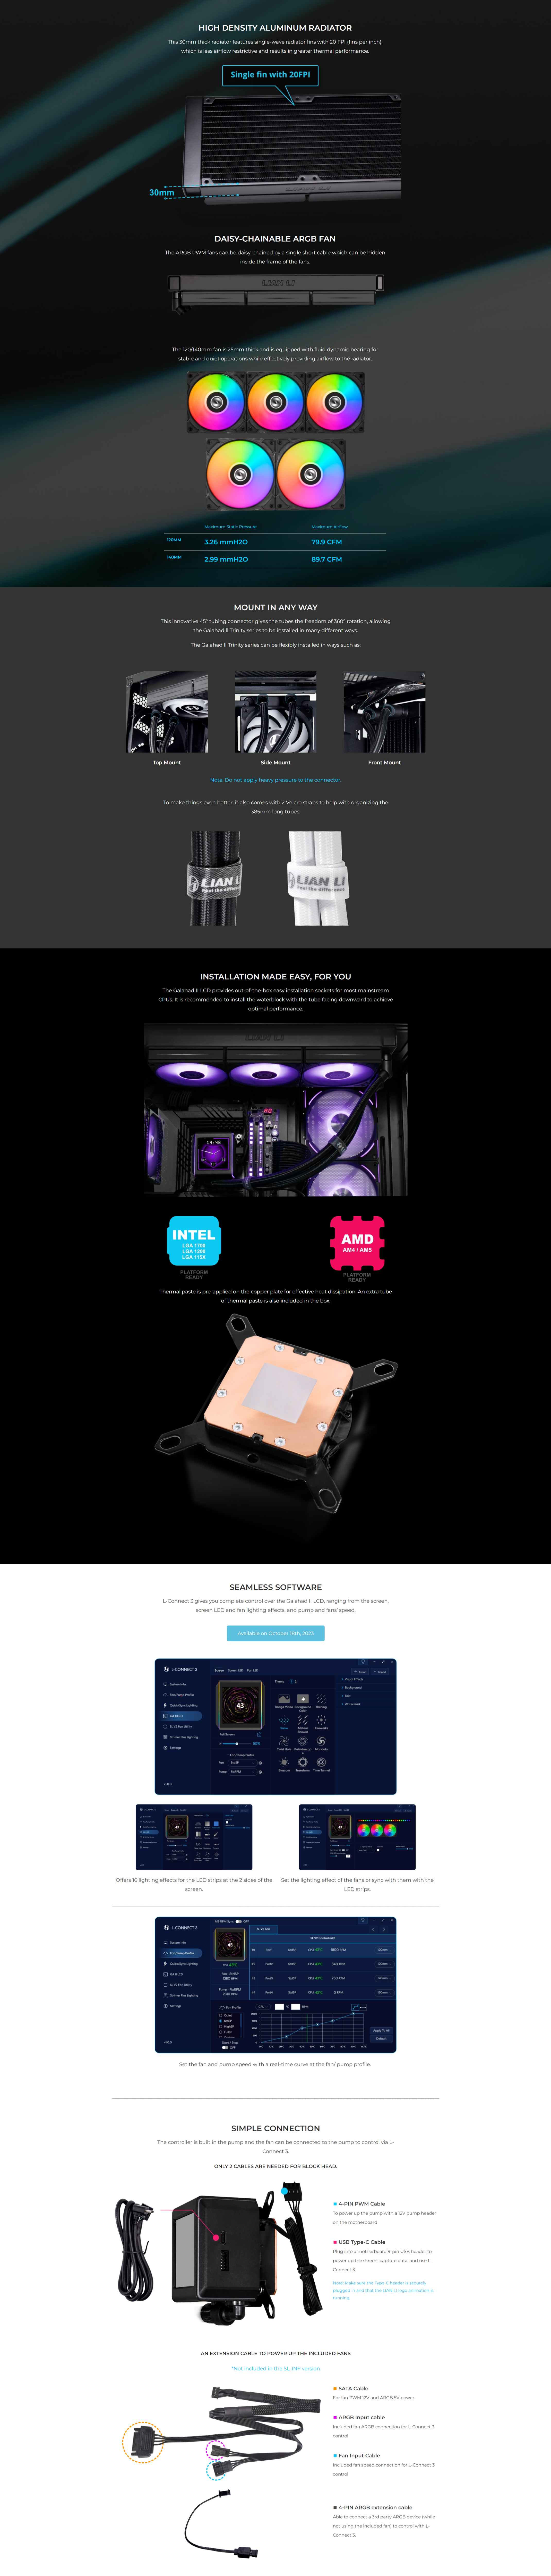 A large marketing image providing additional information about the product Lian Li Galahad II LCD 360 RGB 360mm AIO Liquid CPU Cooler - Black - Additional alt info not provided